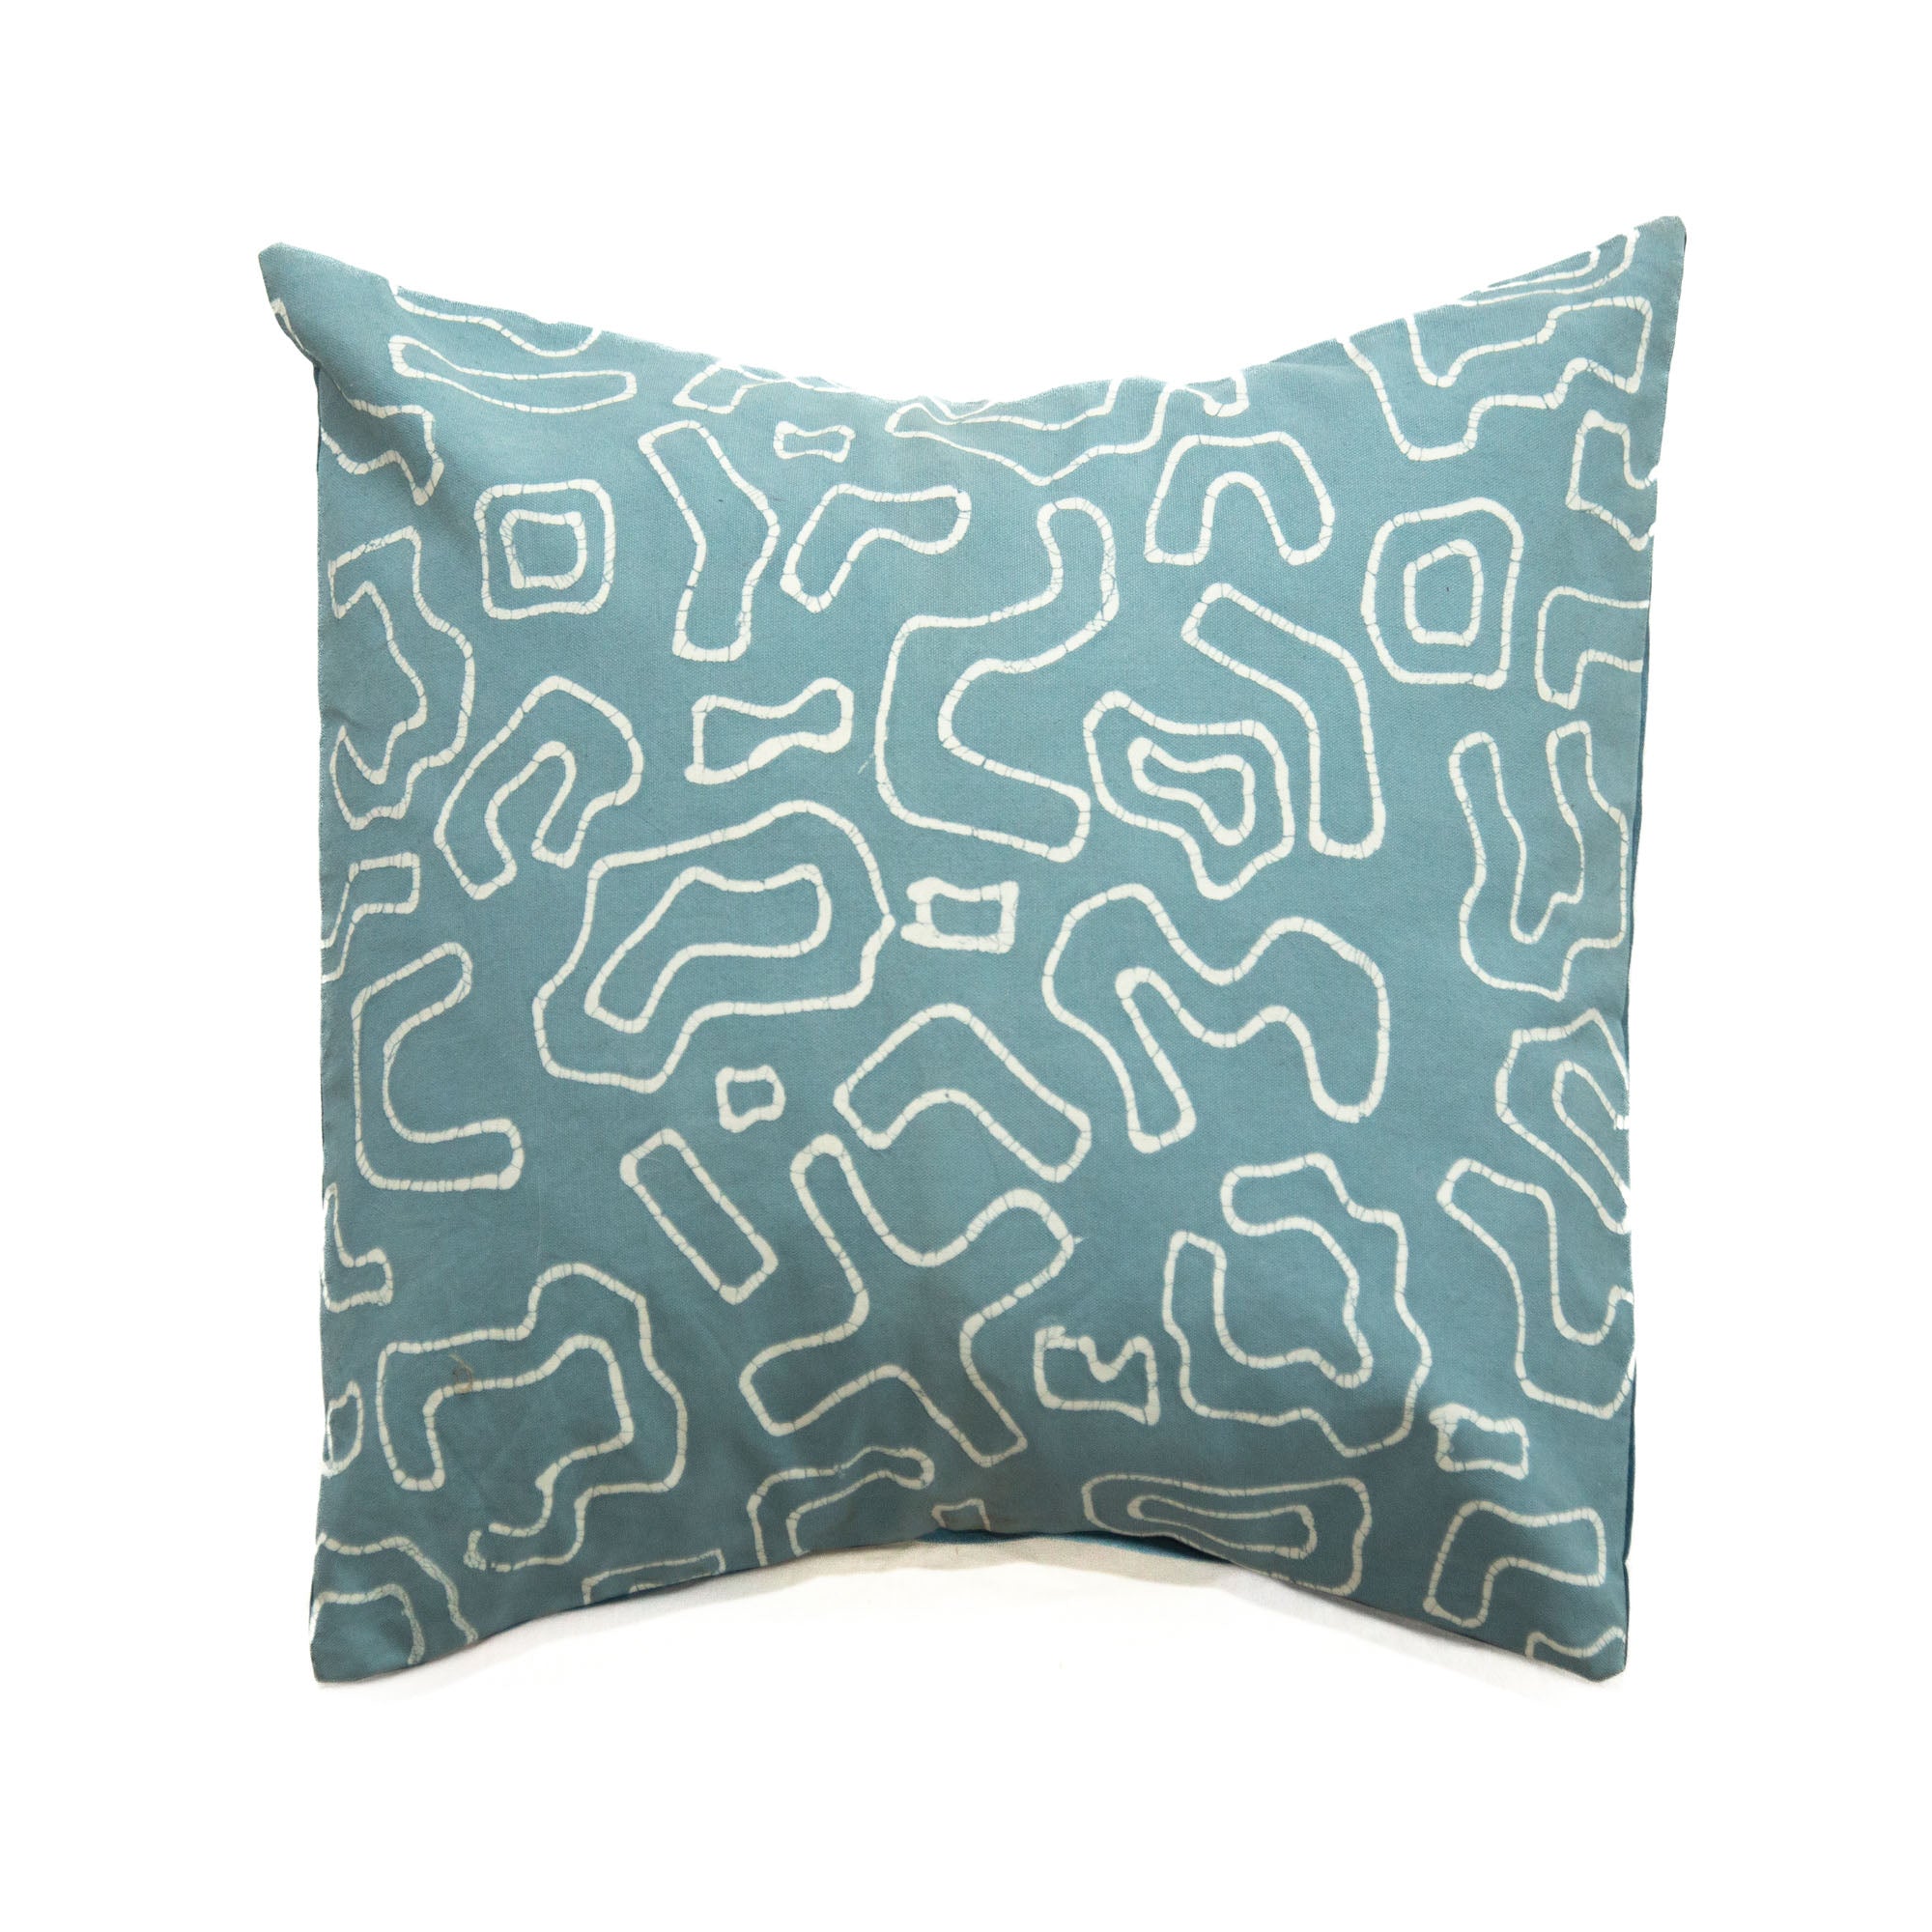 The perfect light blue cushion cover made using a traditional Batik technique on a 100% cotton backing.